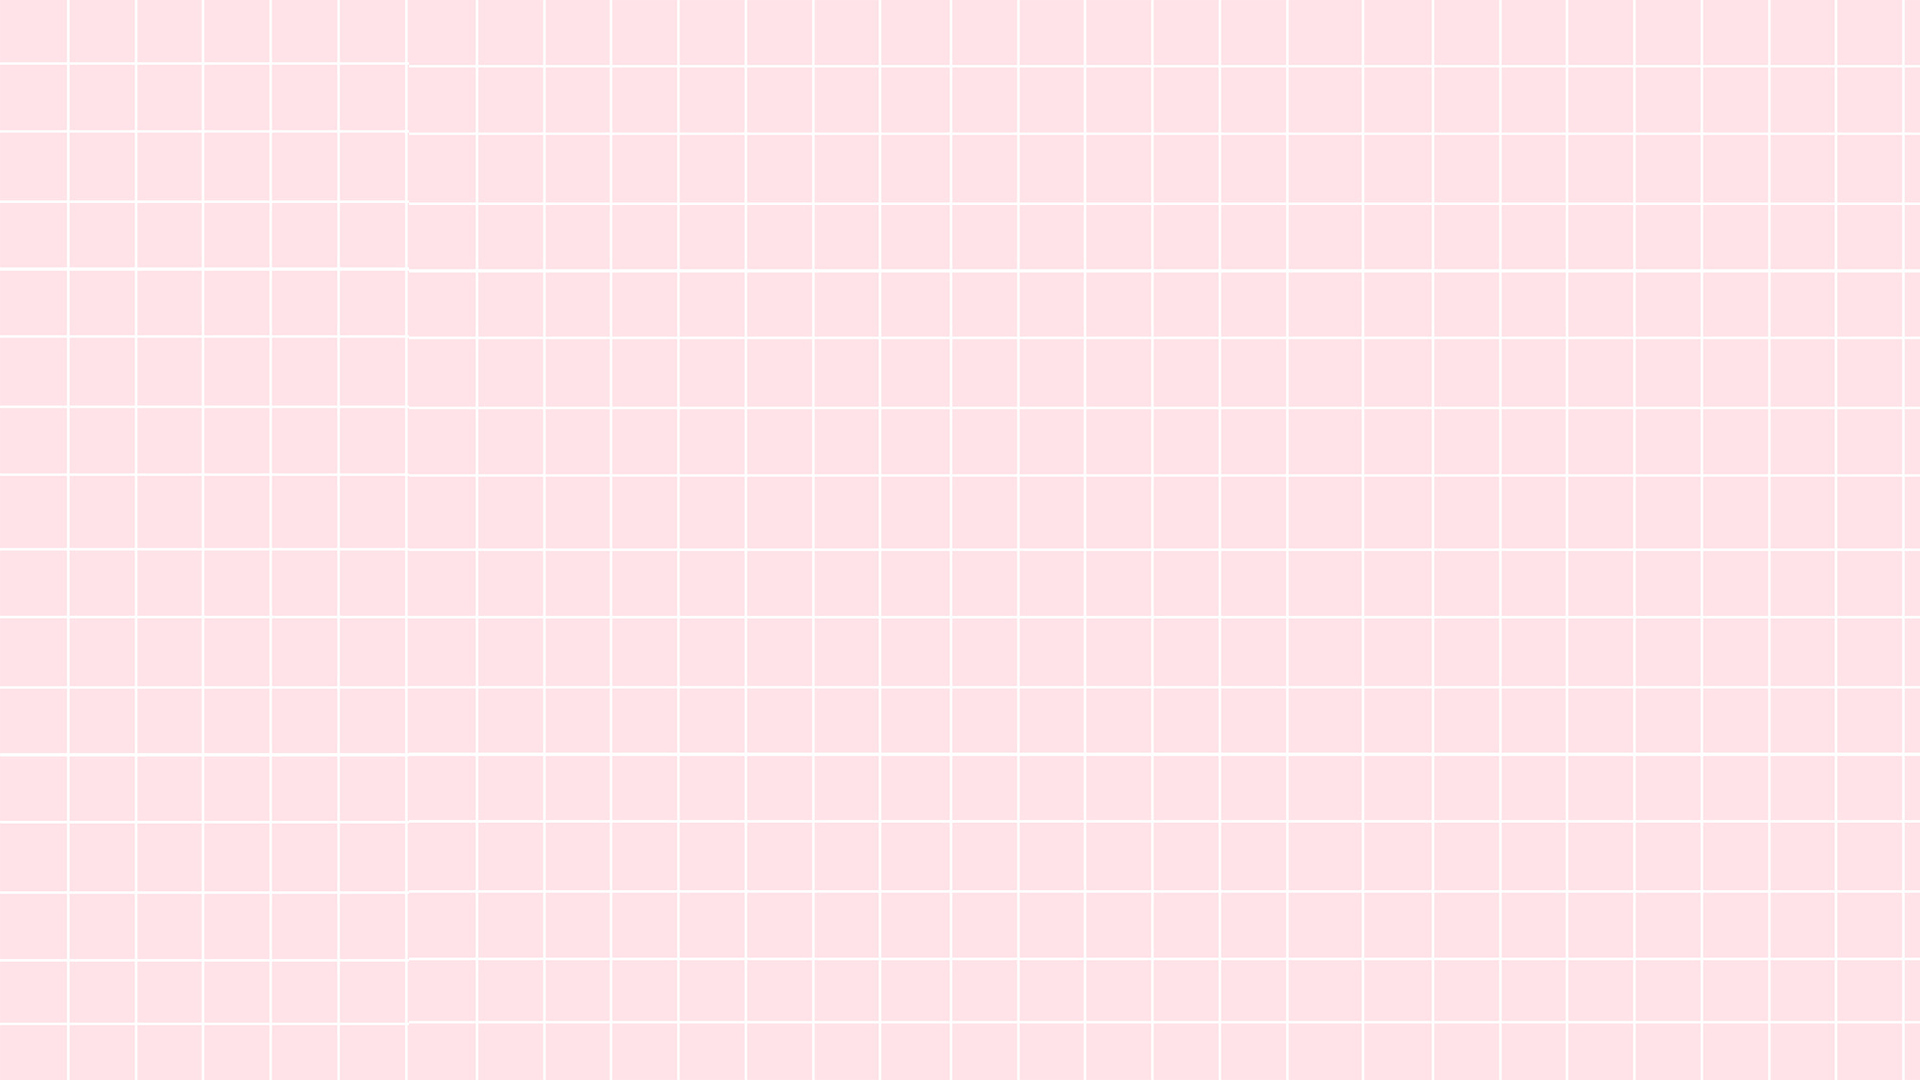 A pink grid pattern on white background - YouTube